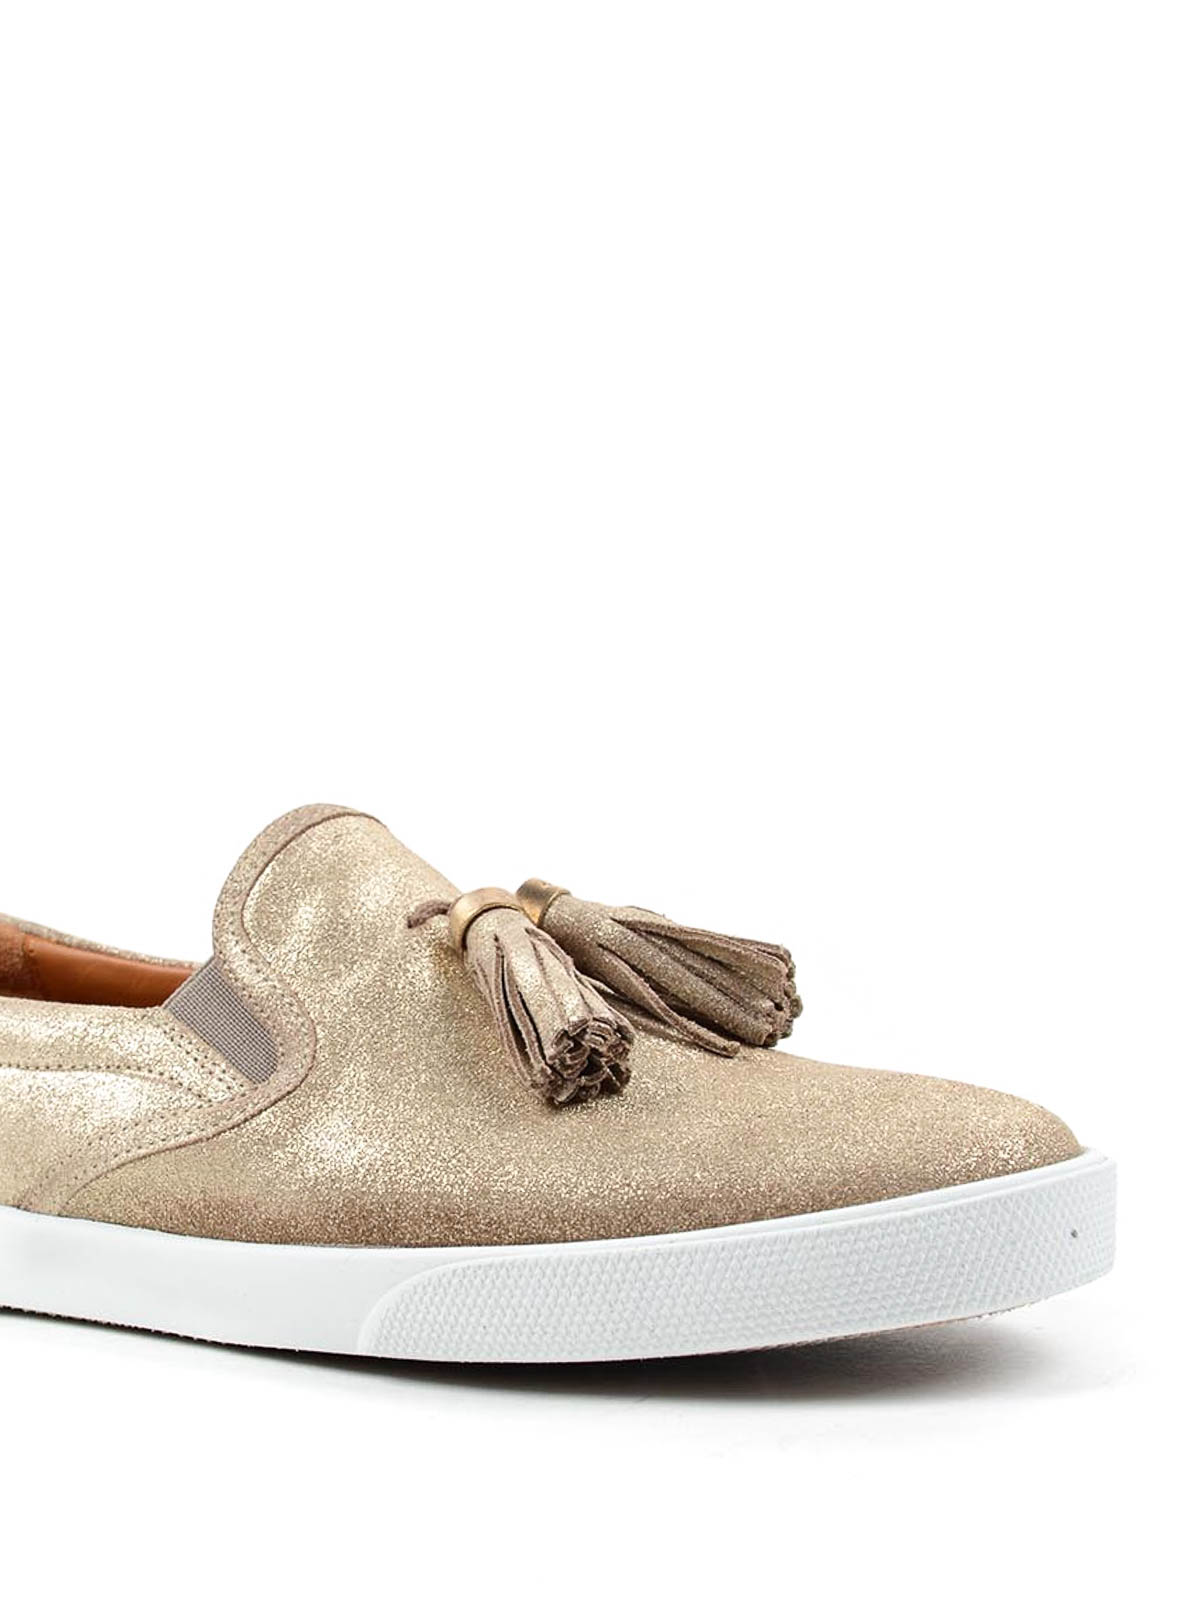 Ende Lagring tonehøjde Loafers & Slippers Jimmy Choo - Dale Flat metallic suede slip-ons -  DALEFLATMIUSAND